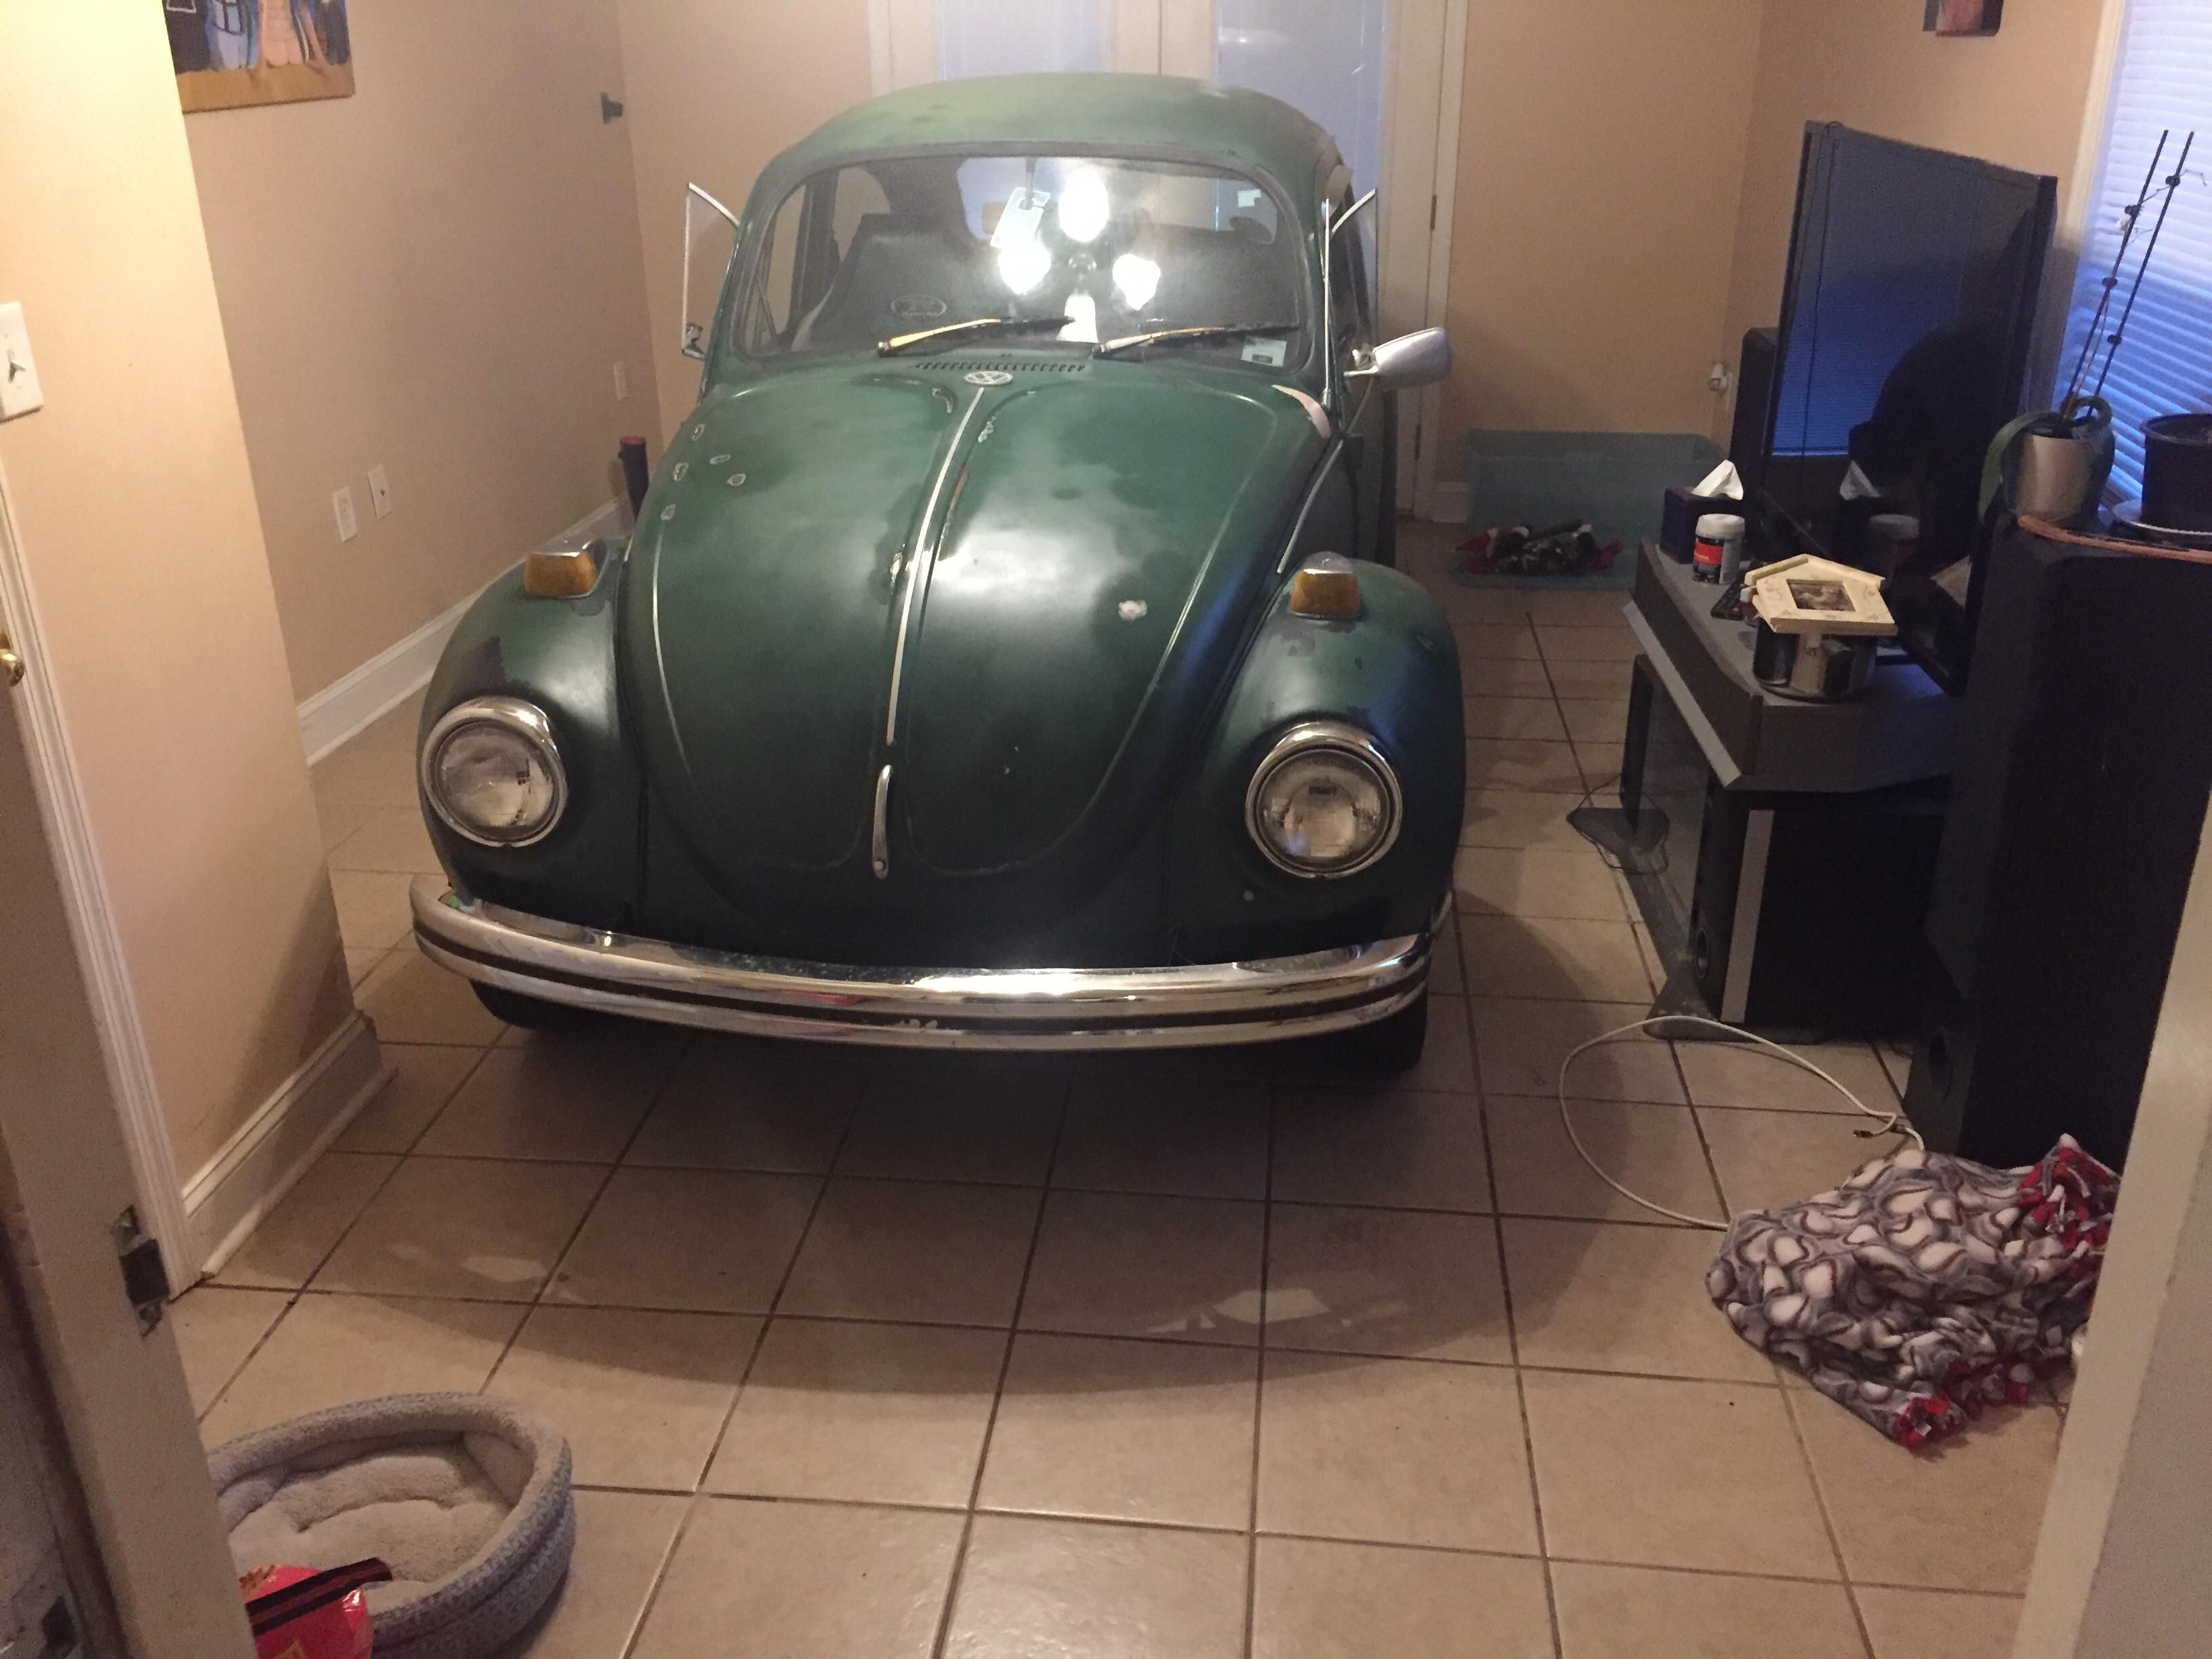 I found out that our Volkswagen fits in the den. Will see what the wife thinks when she gets home.